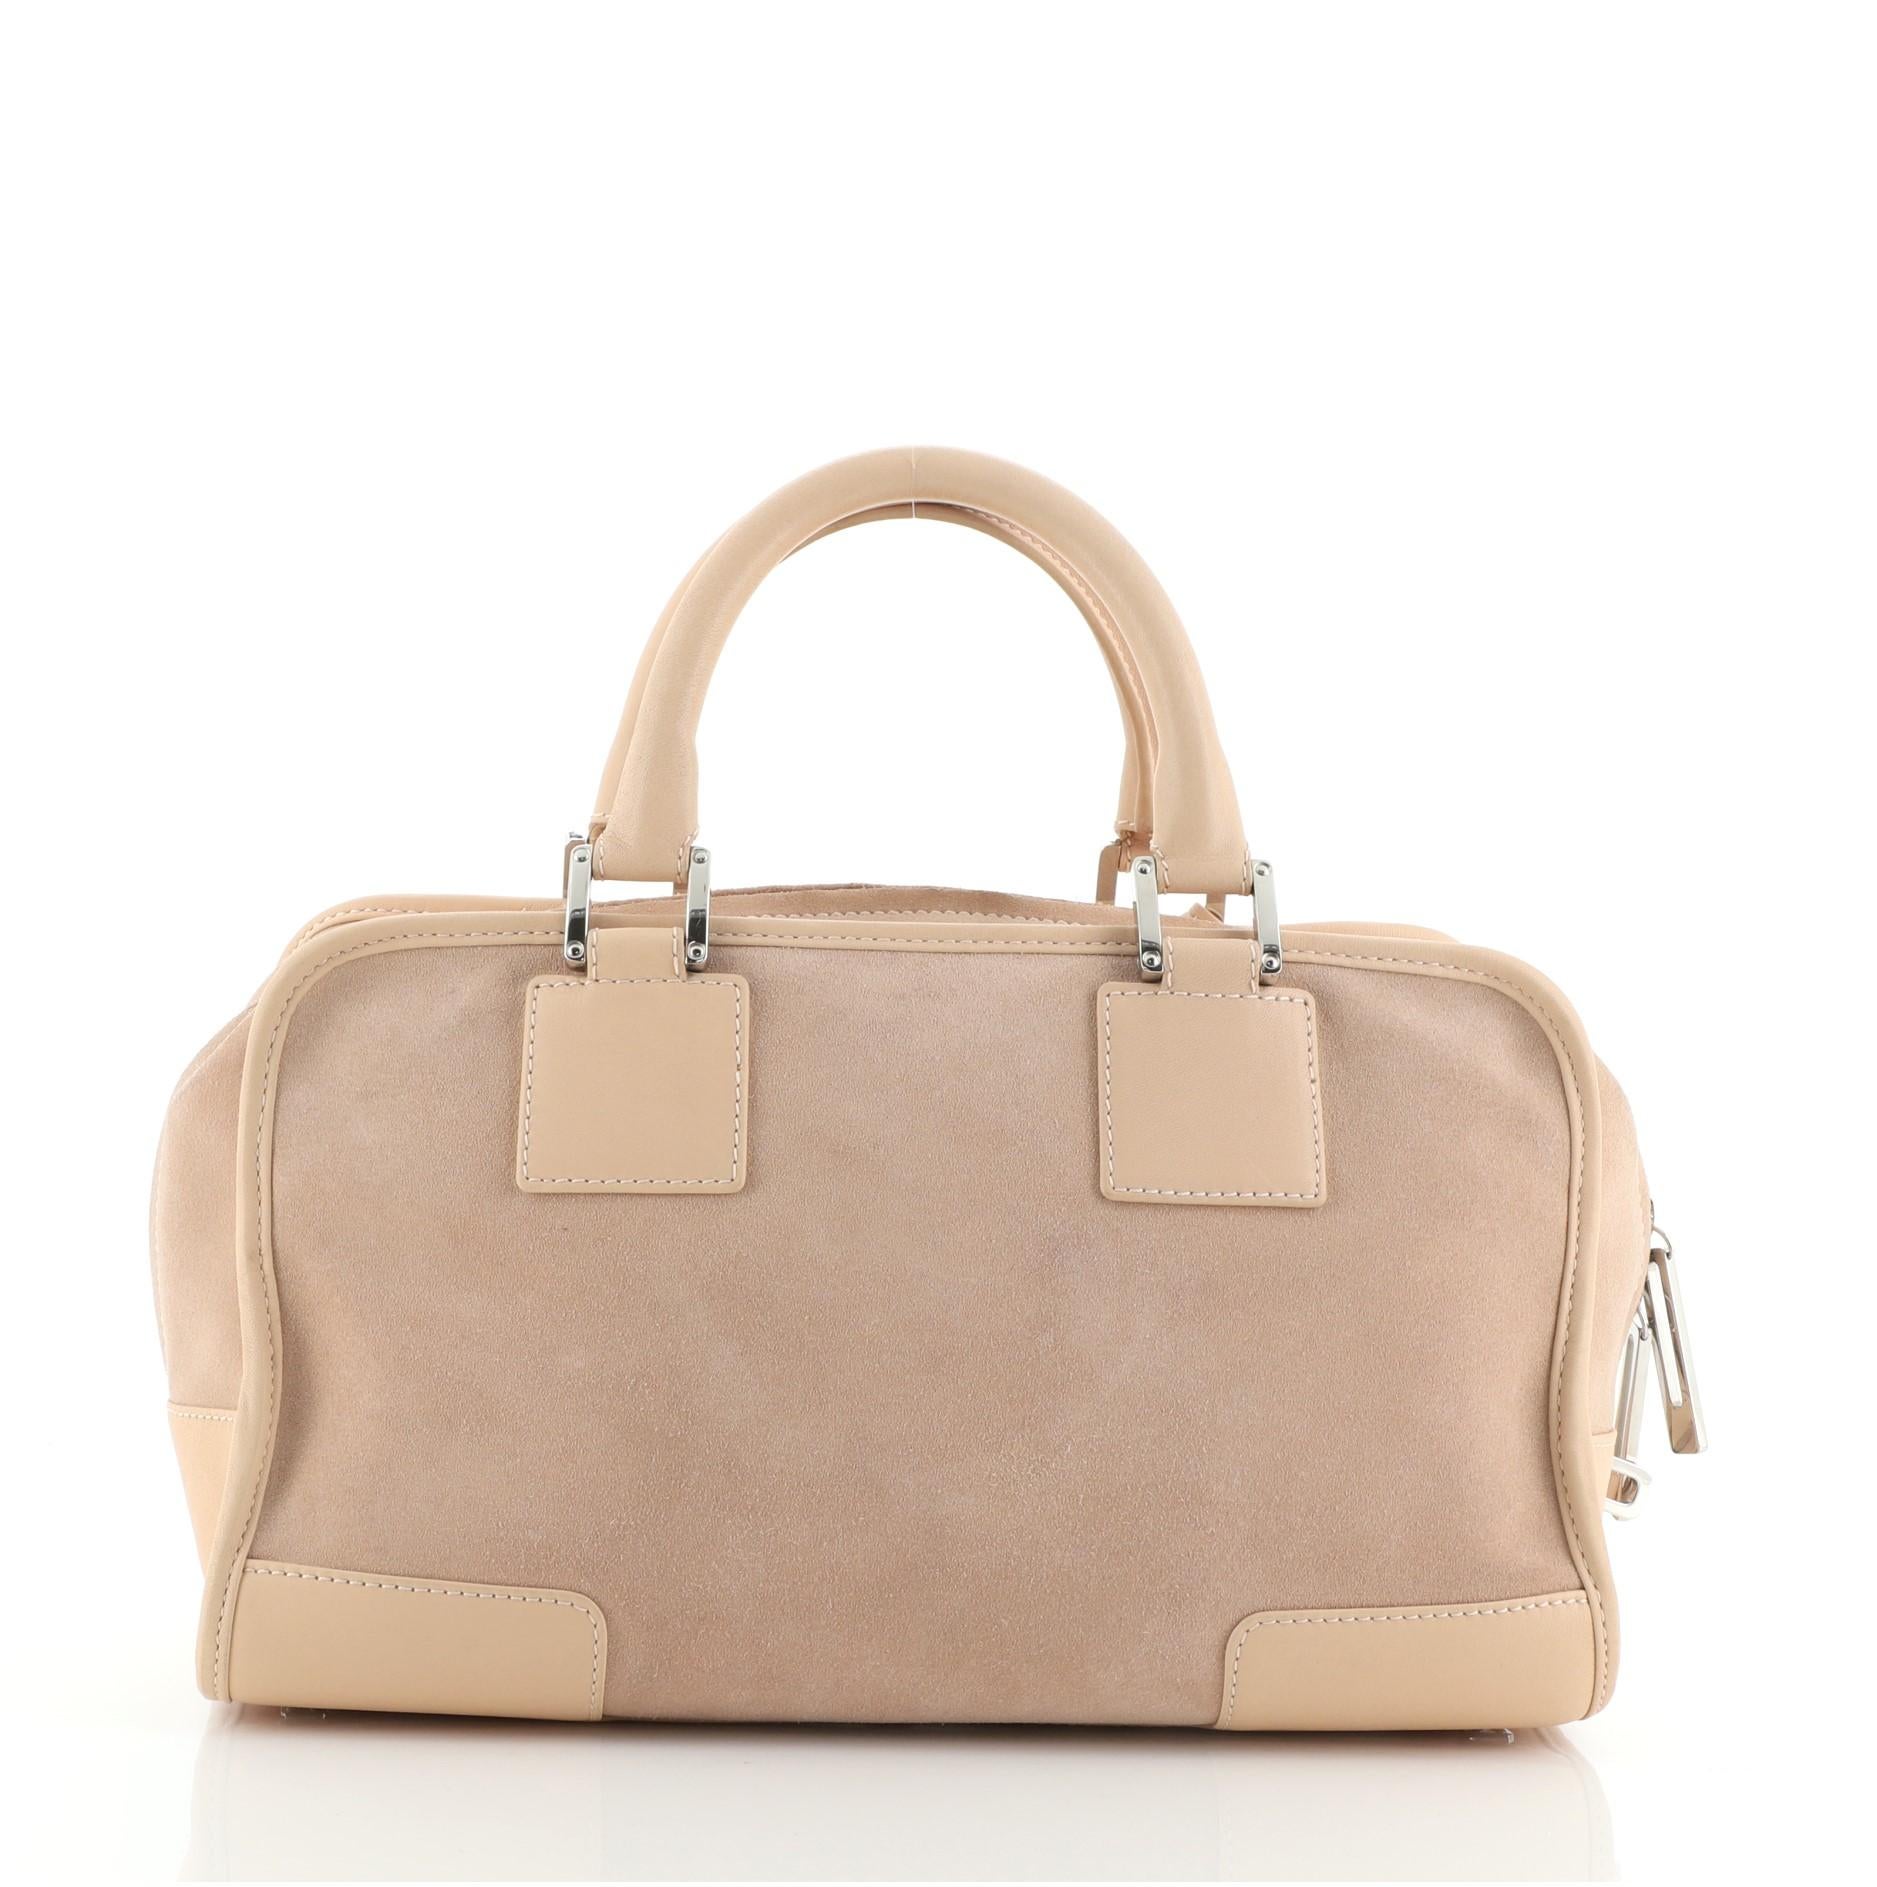 Loewe Amazona Bag Suede 28
Pink

Condition Details: Creasing and darkening on exterior, wear on base corners, handles and in interior. Cracking on handle wax edges, scratches on hardware.

51938MSC

Height 7